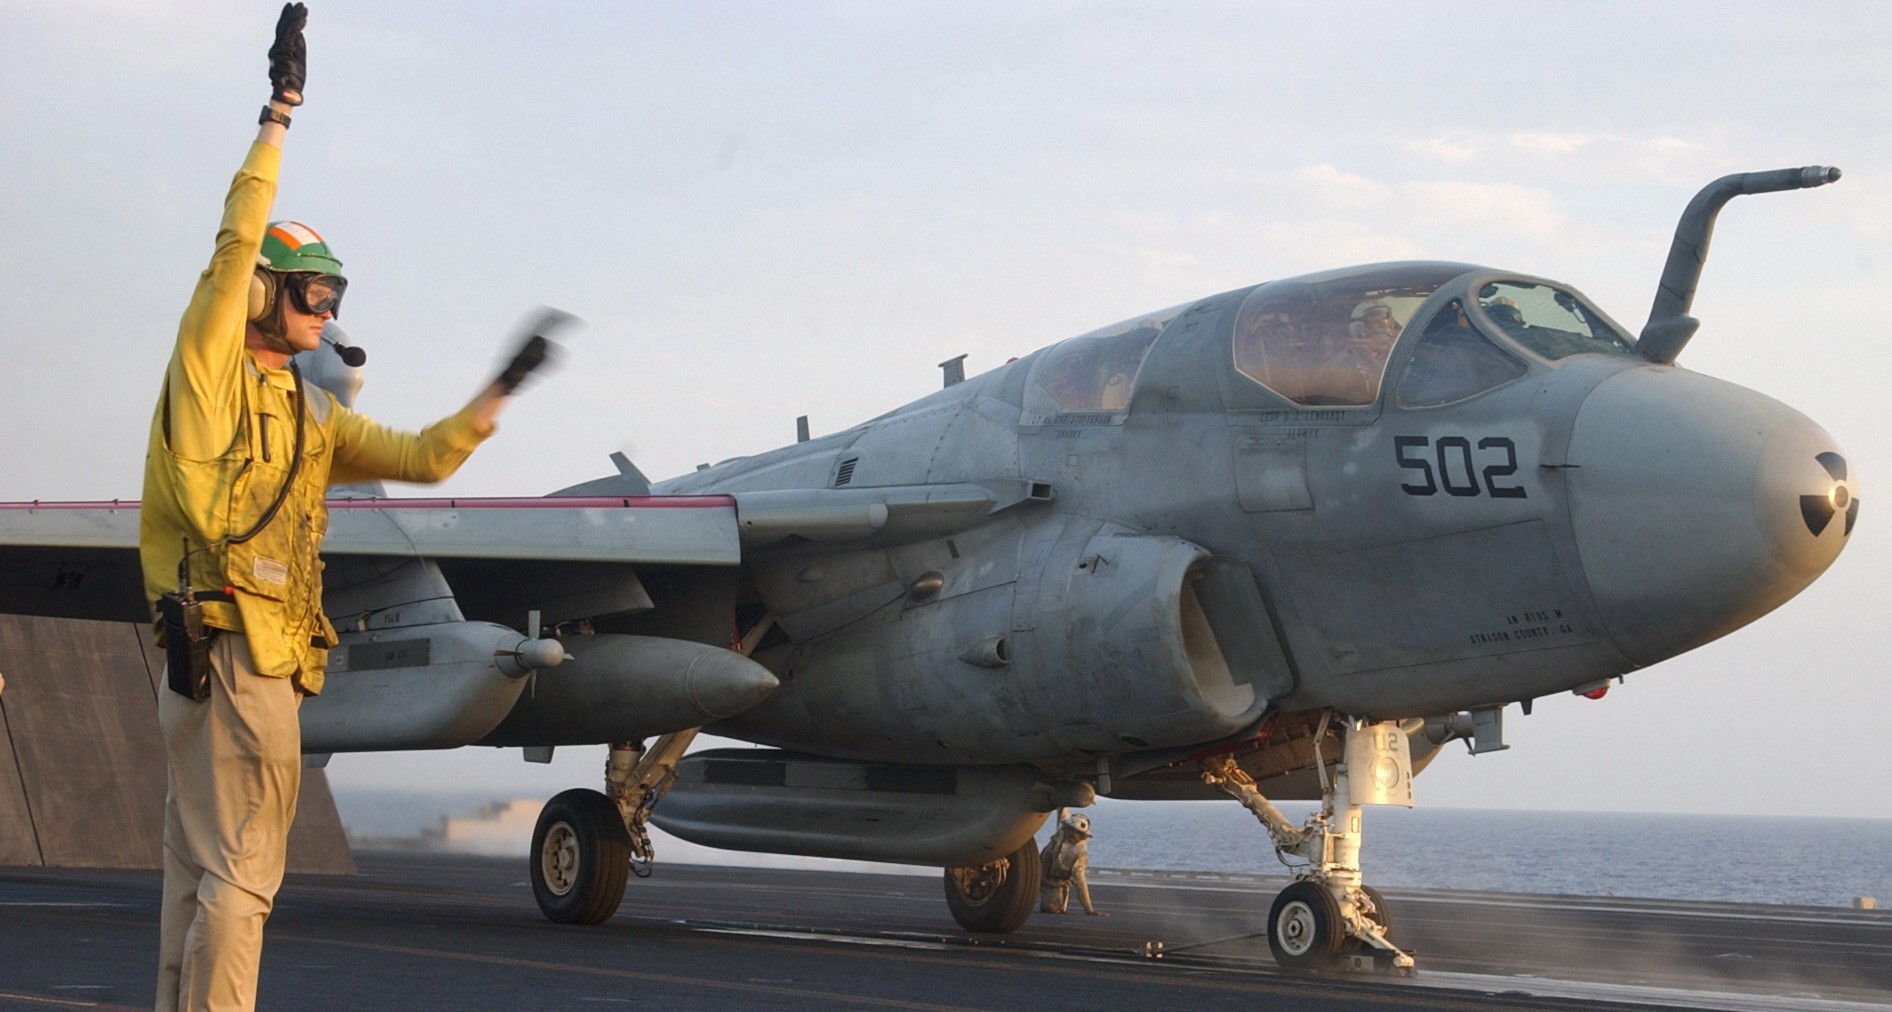 vaq-138 yellowjackets electronic attack squadron us navy ea-6b prowler carrier air wing cvw-9 uss carl vinson cvn-70 06